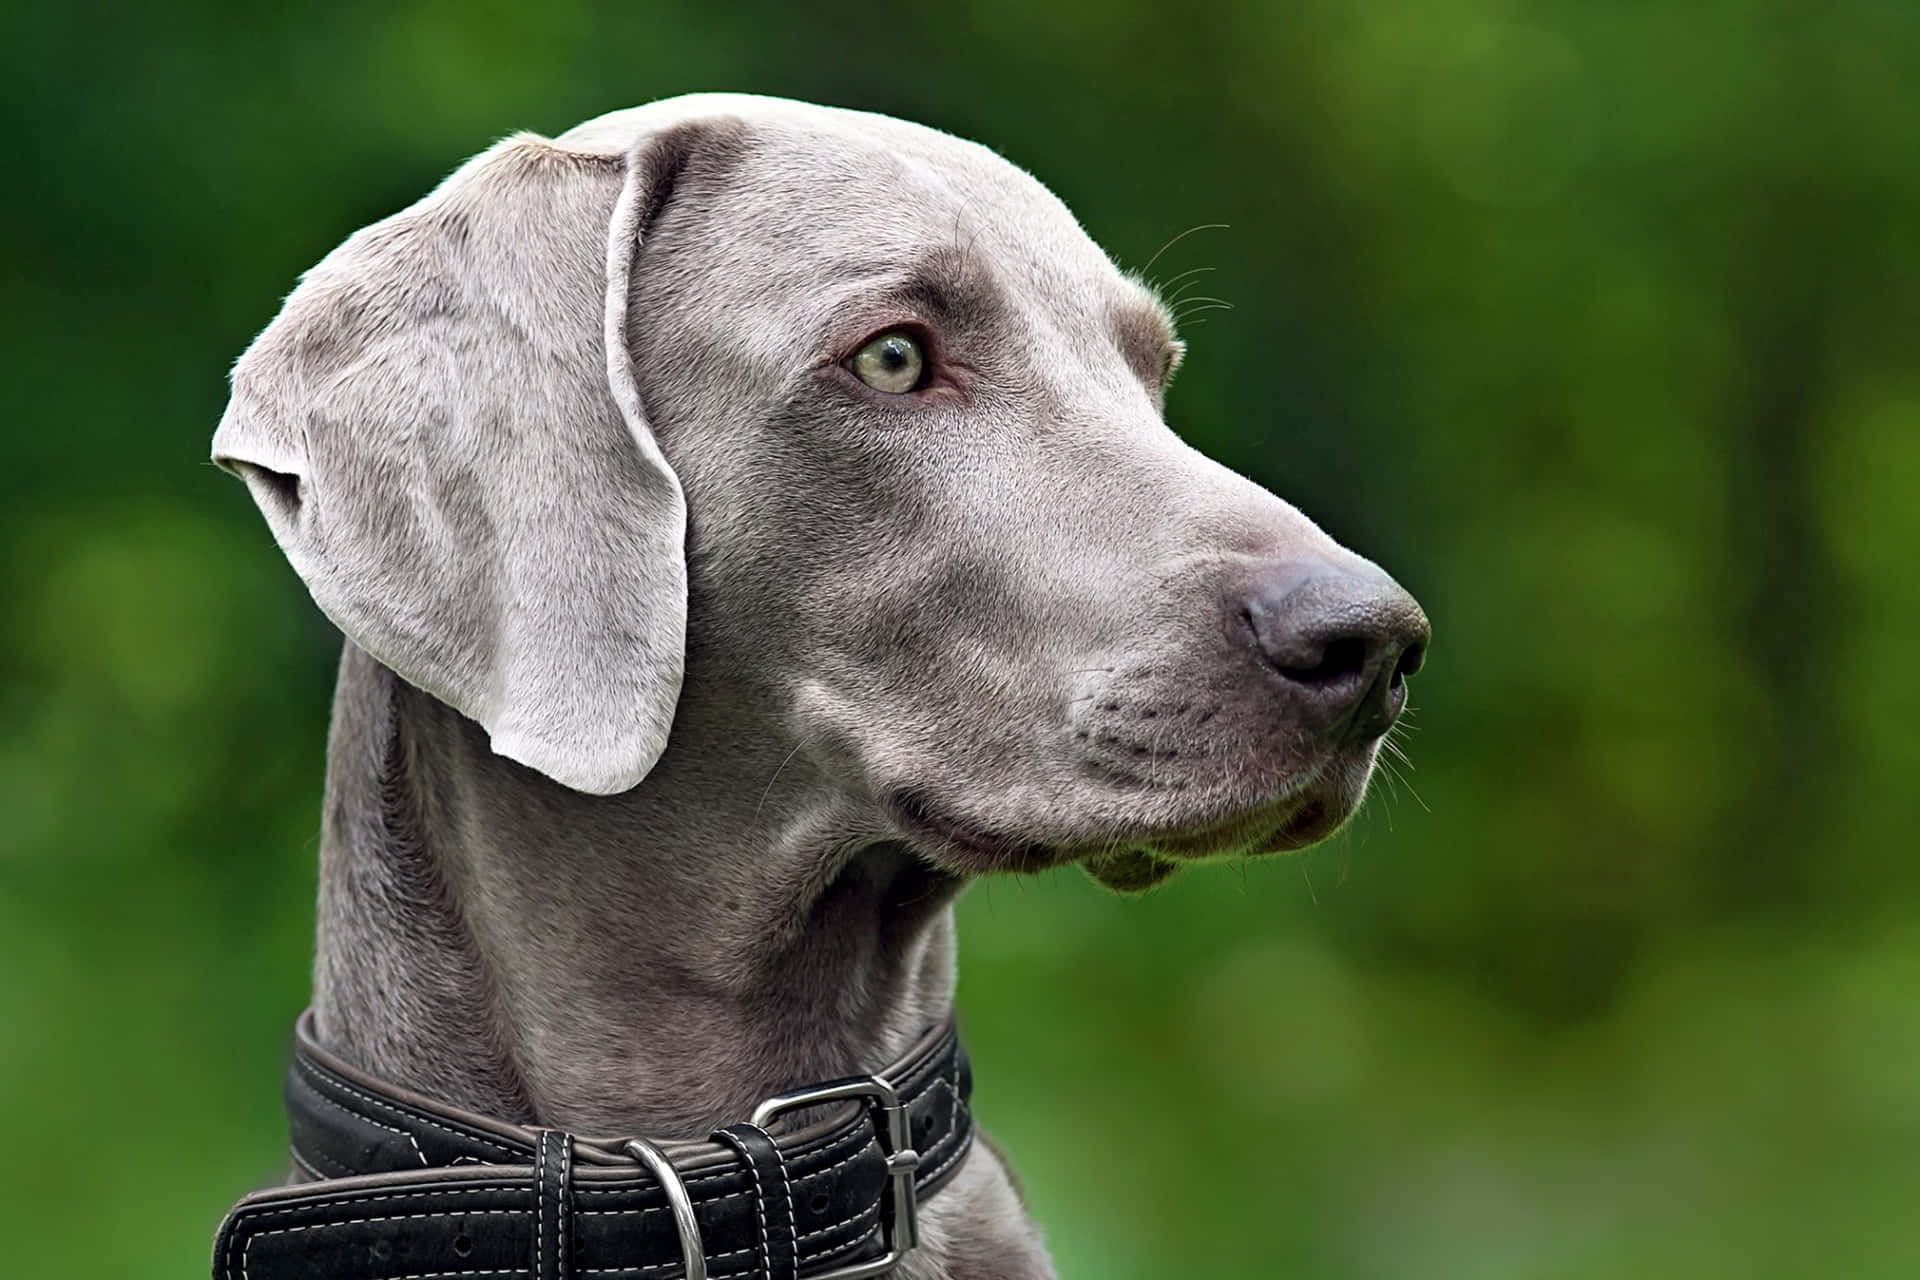 "This majestic Weimaraner is ready to explore"